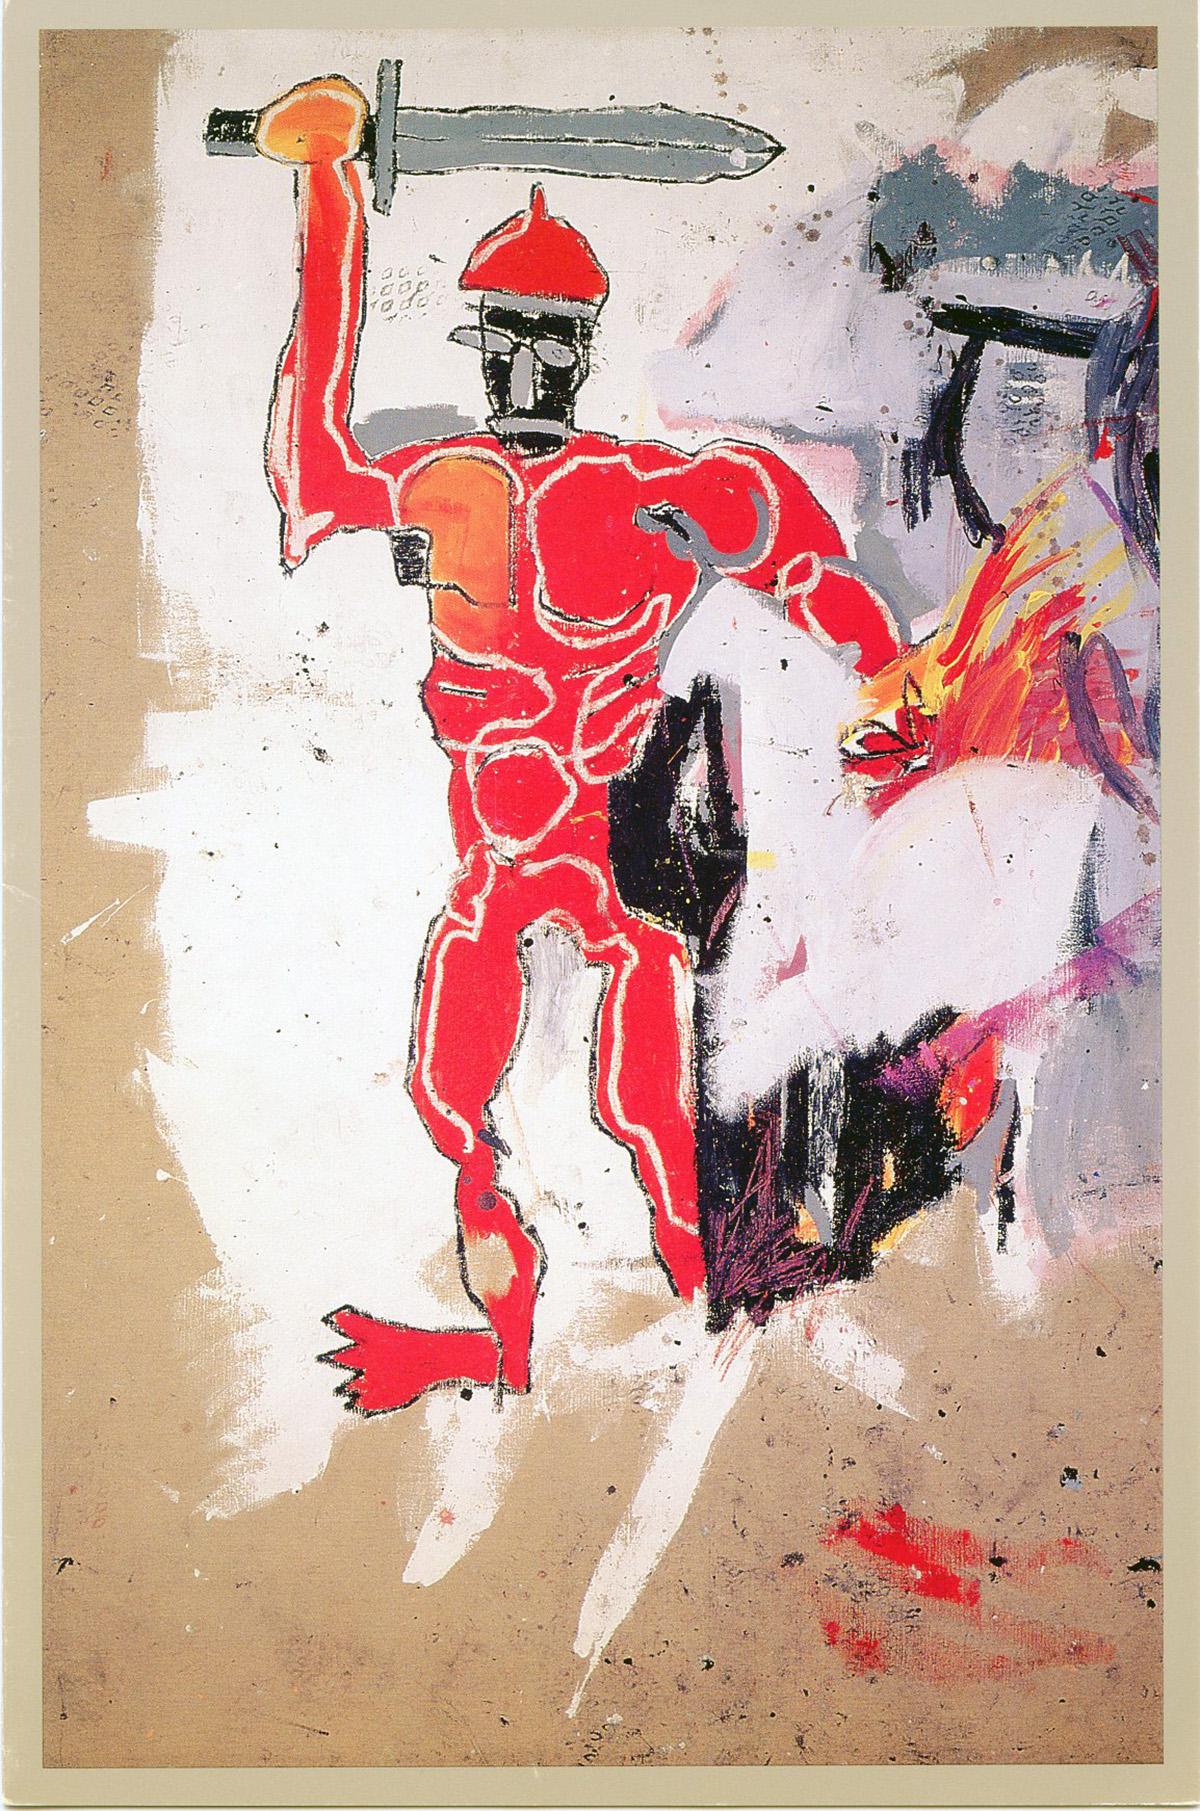 Basquiat at Vrej Baghoomian gallery 1989 (Basquiat Red Warrior announcement) 